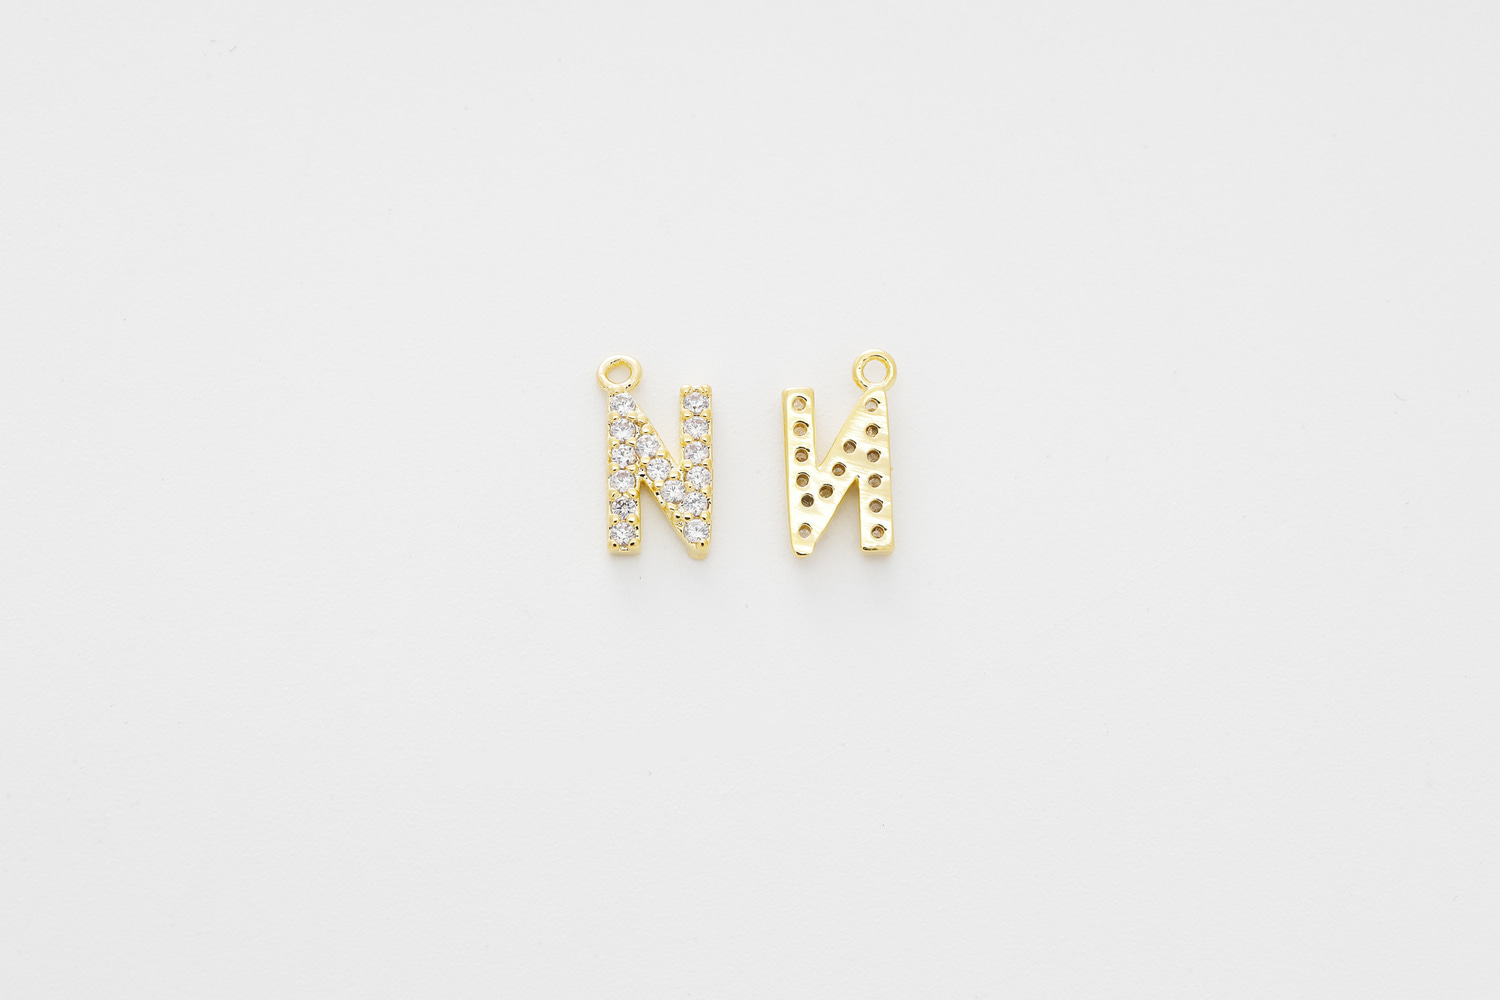 [AN-G20] Cubic capital letter charm N, Brass, Cubic zirconia, Nickel free, Jewelry making supplies, Alphabet charm, Initial charm, 1 piece